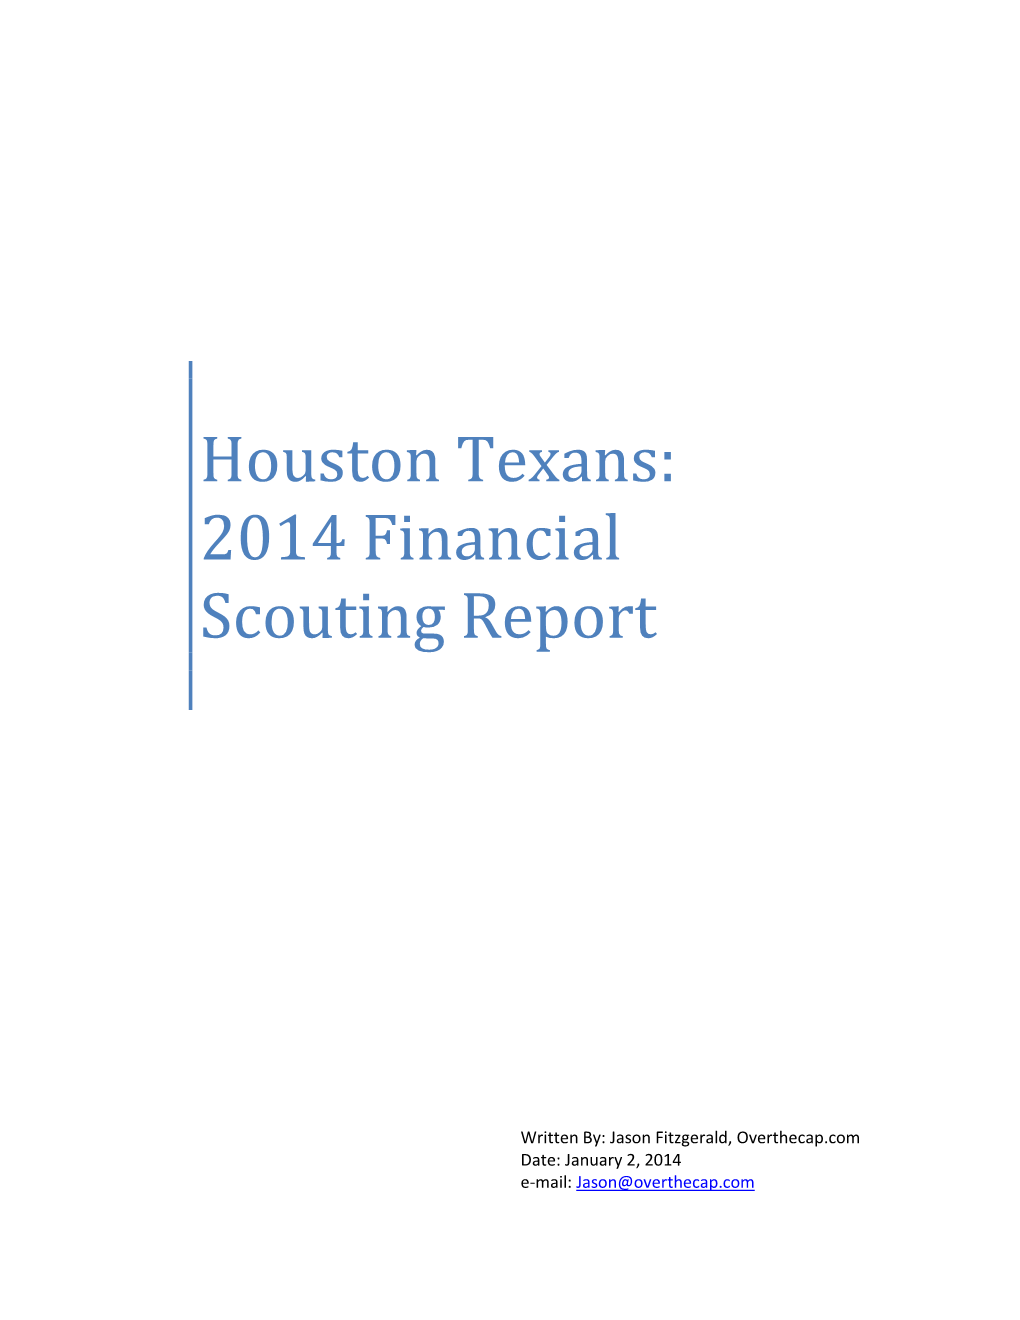 Houston Texans: 2014 Financial Scouting Report